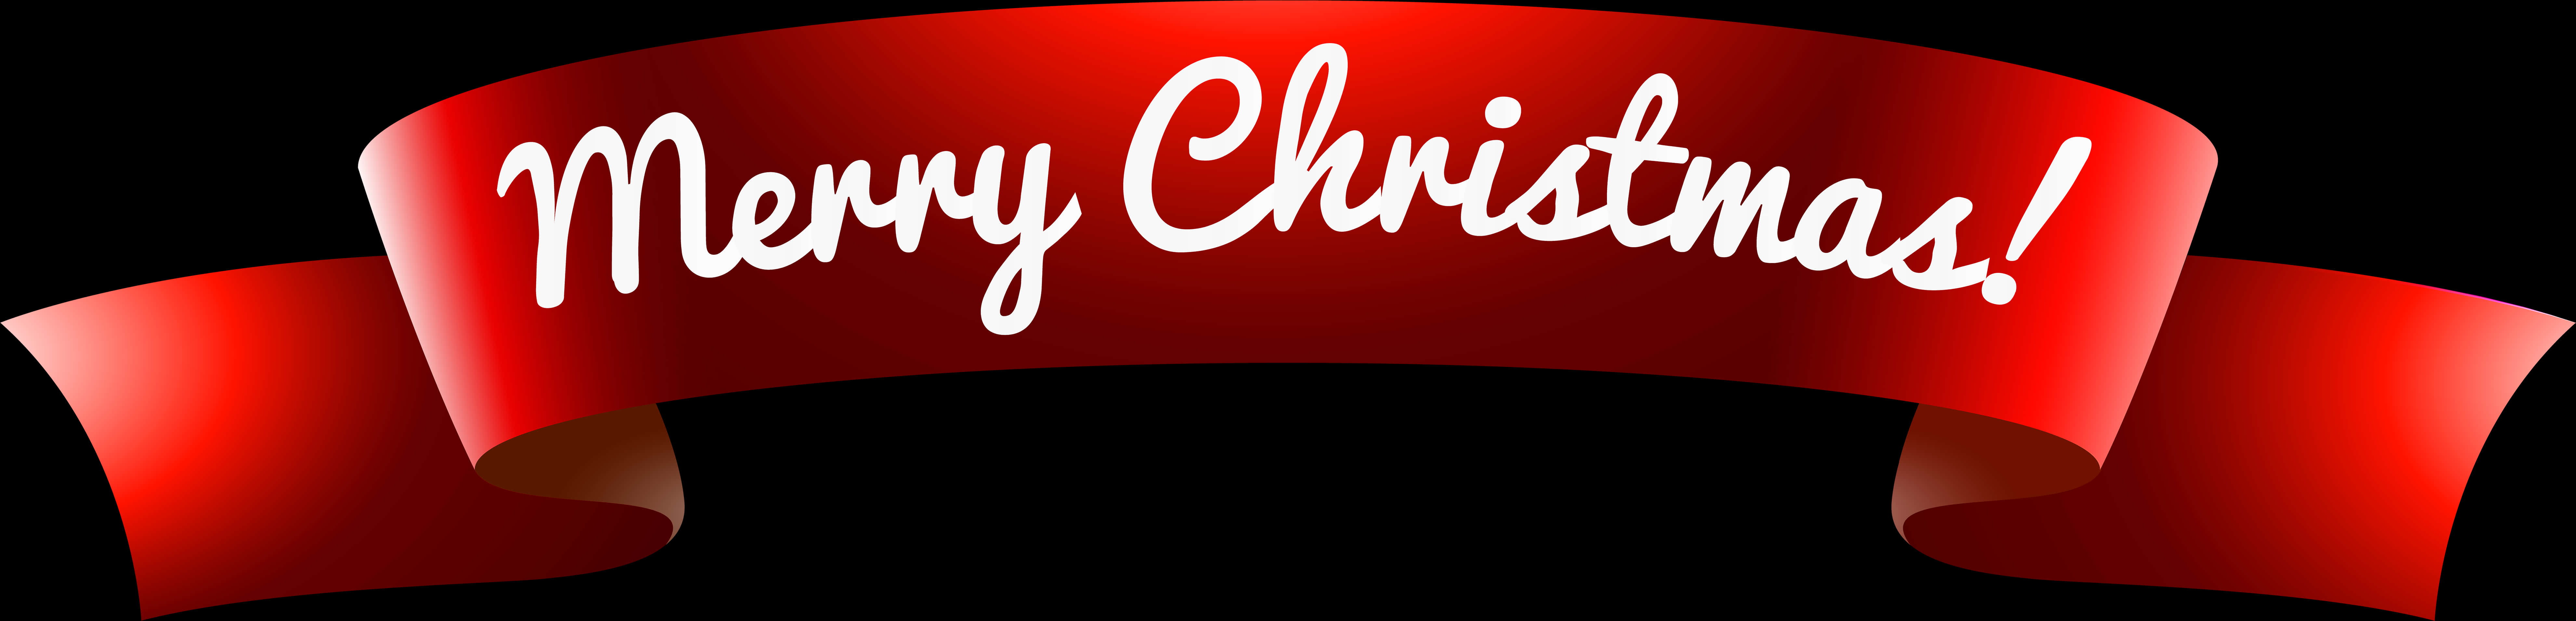 Download Merry Christmas Red Banner | Wallpapers.com